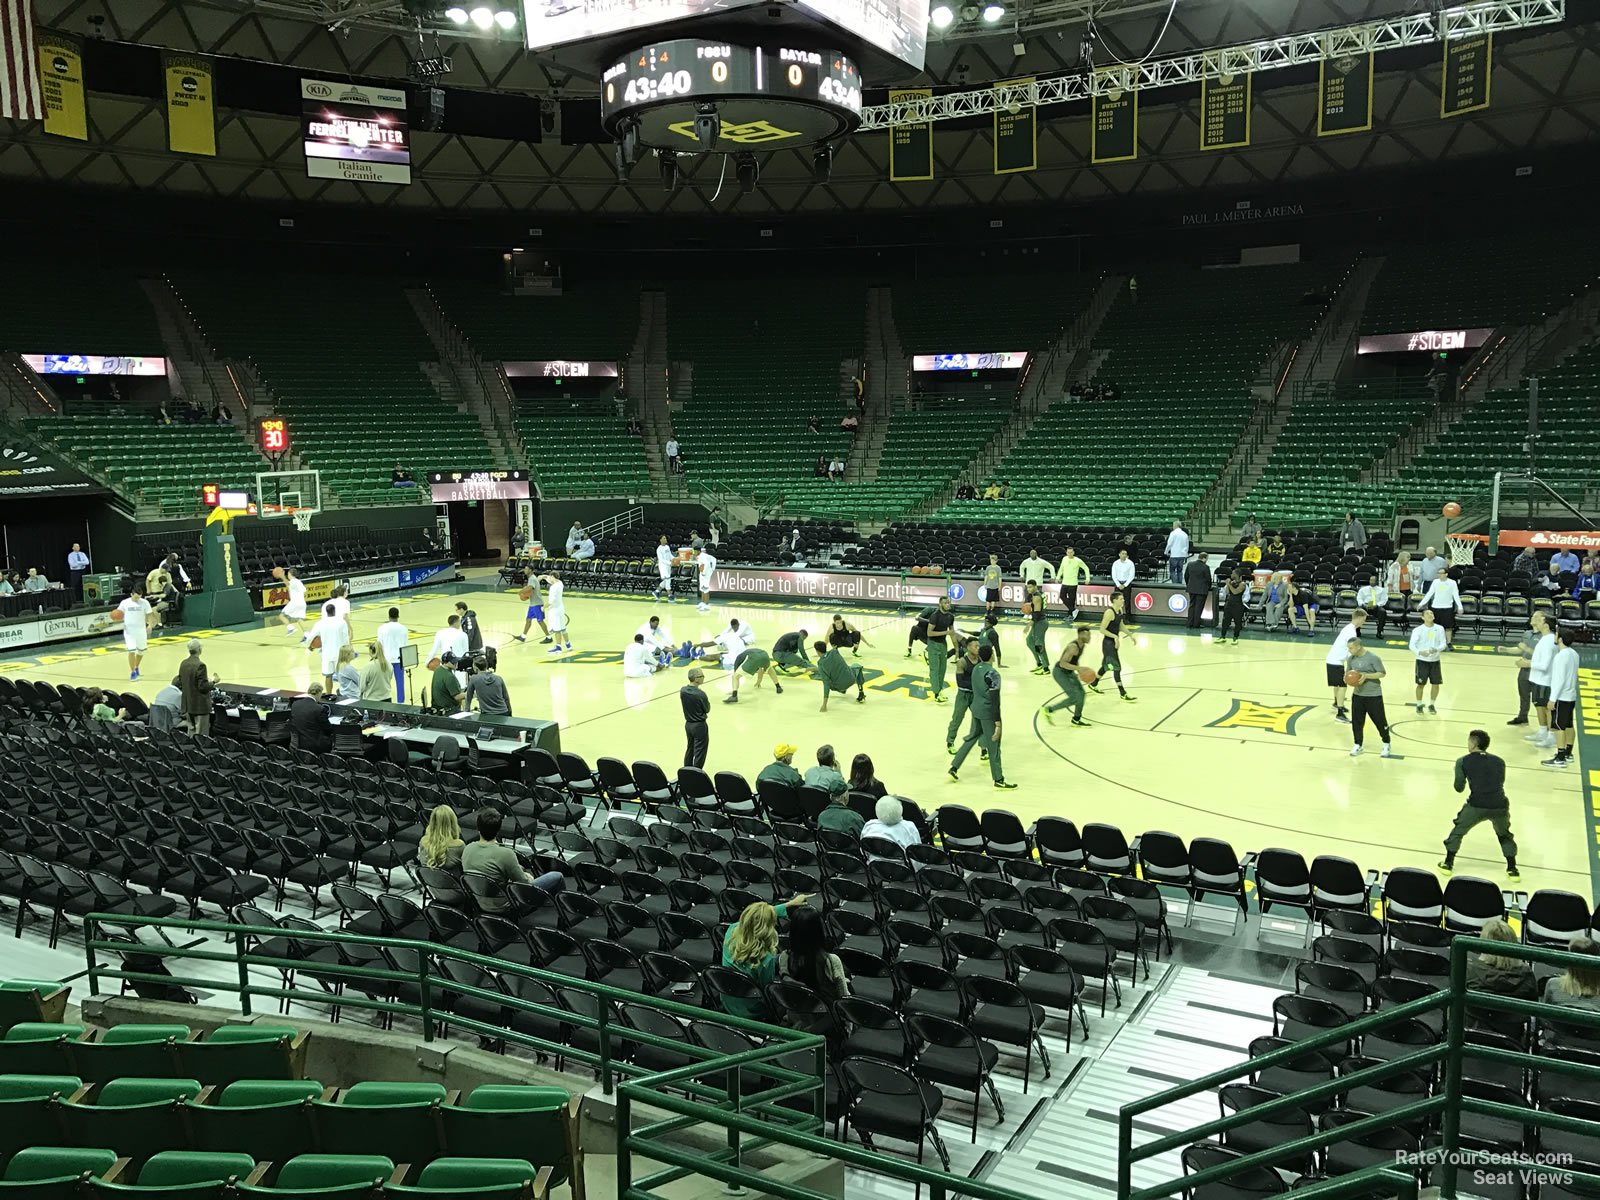 section 123, row 10 seat view  - ferrell center